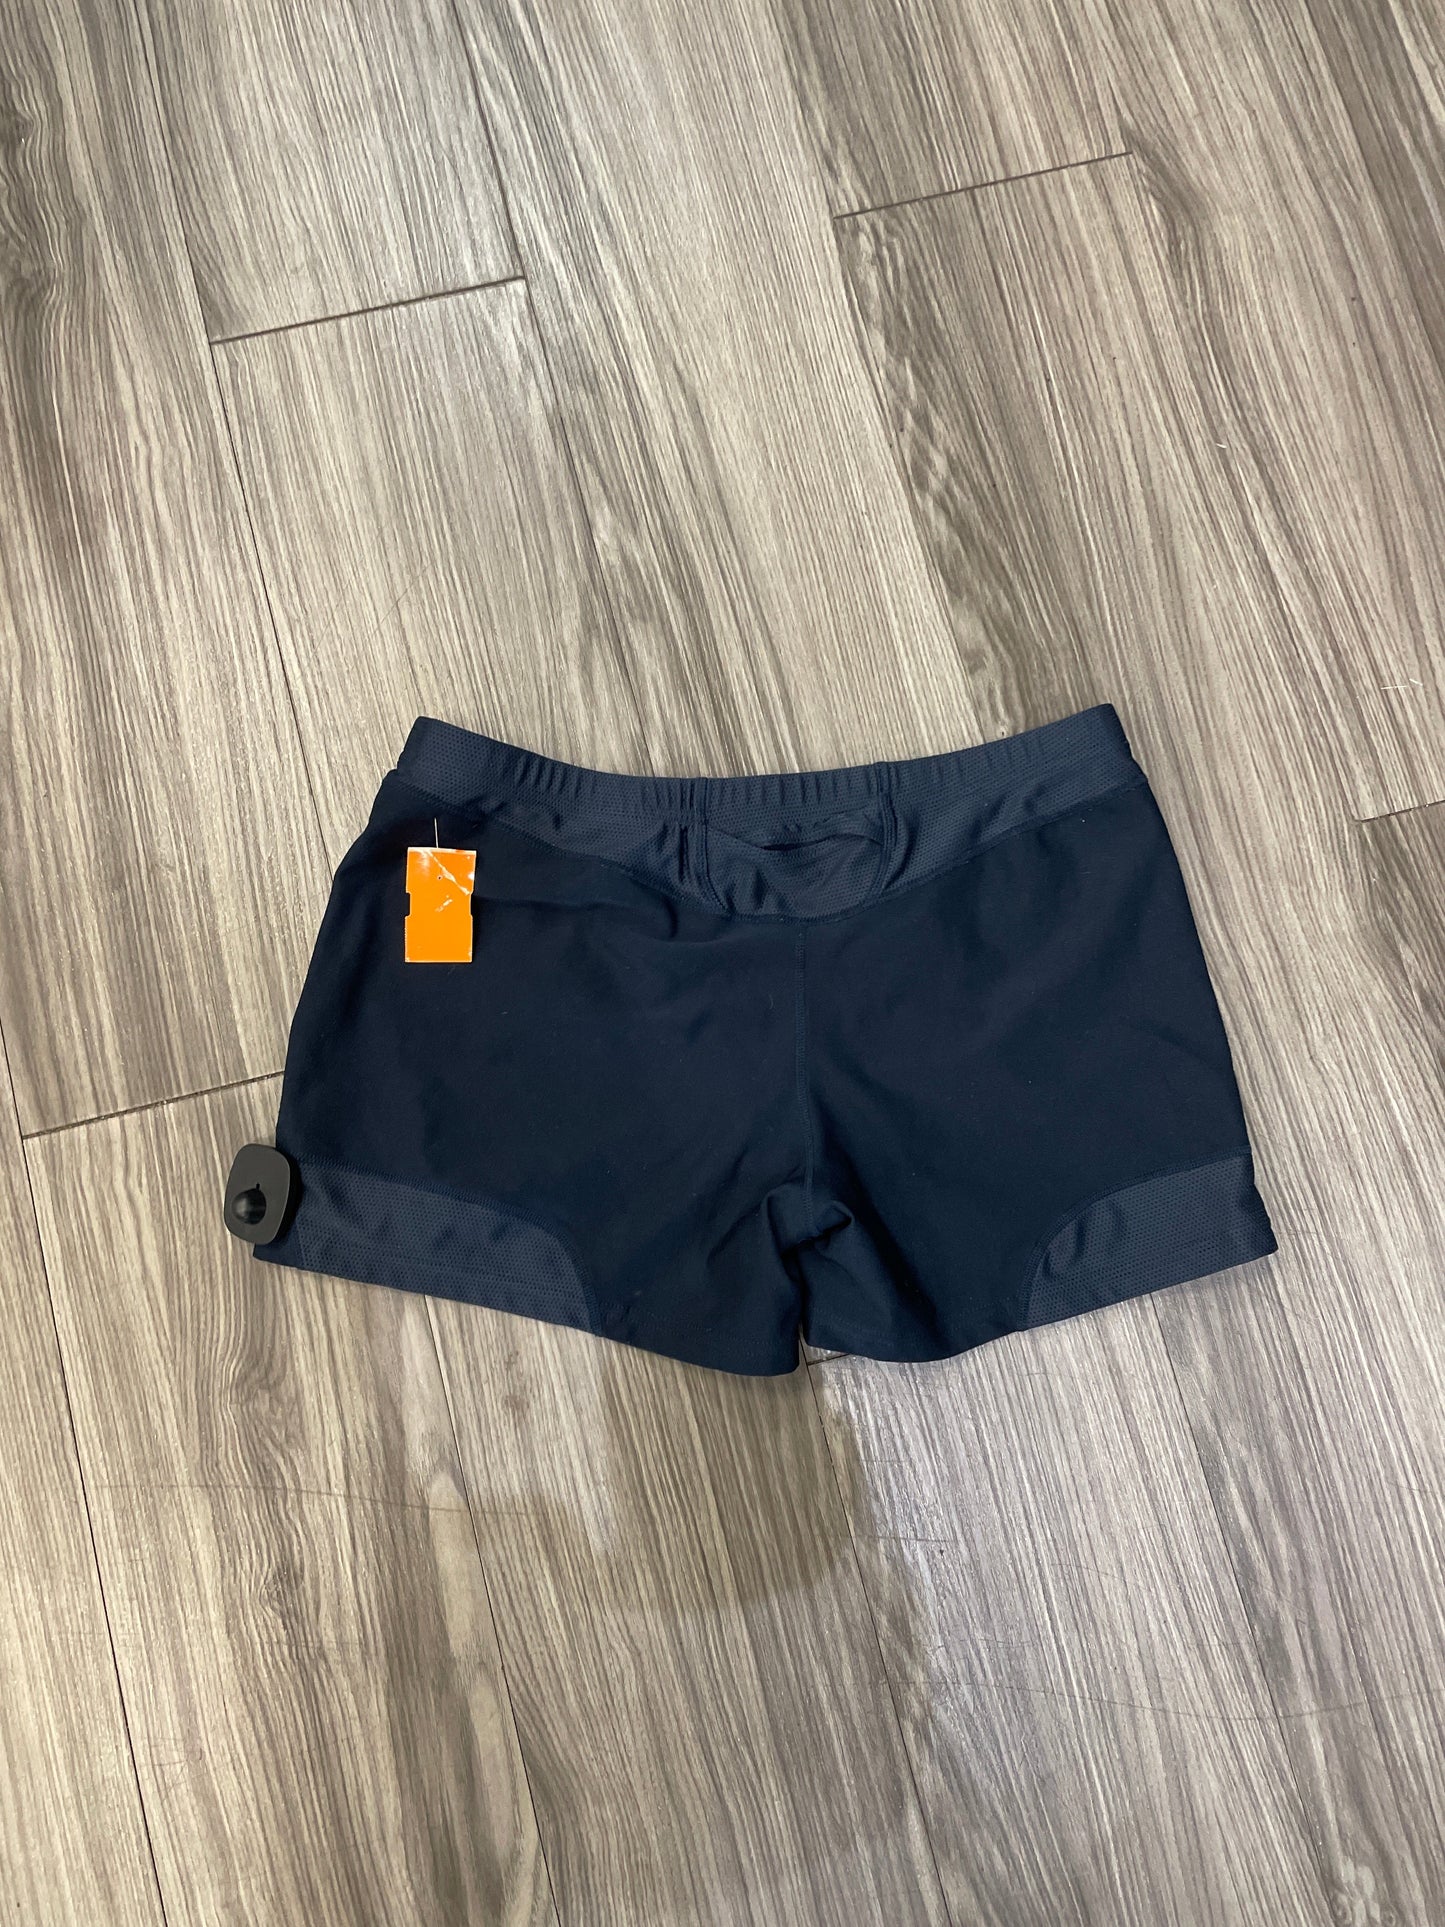 Shorts By Nike  Size: M